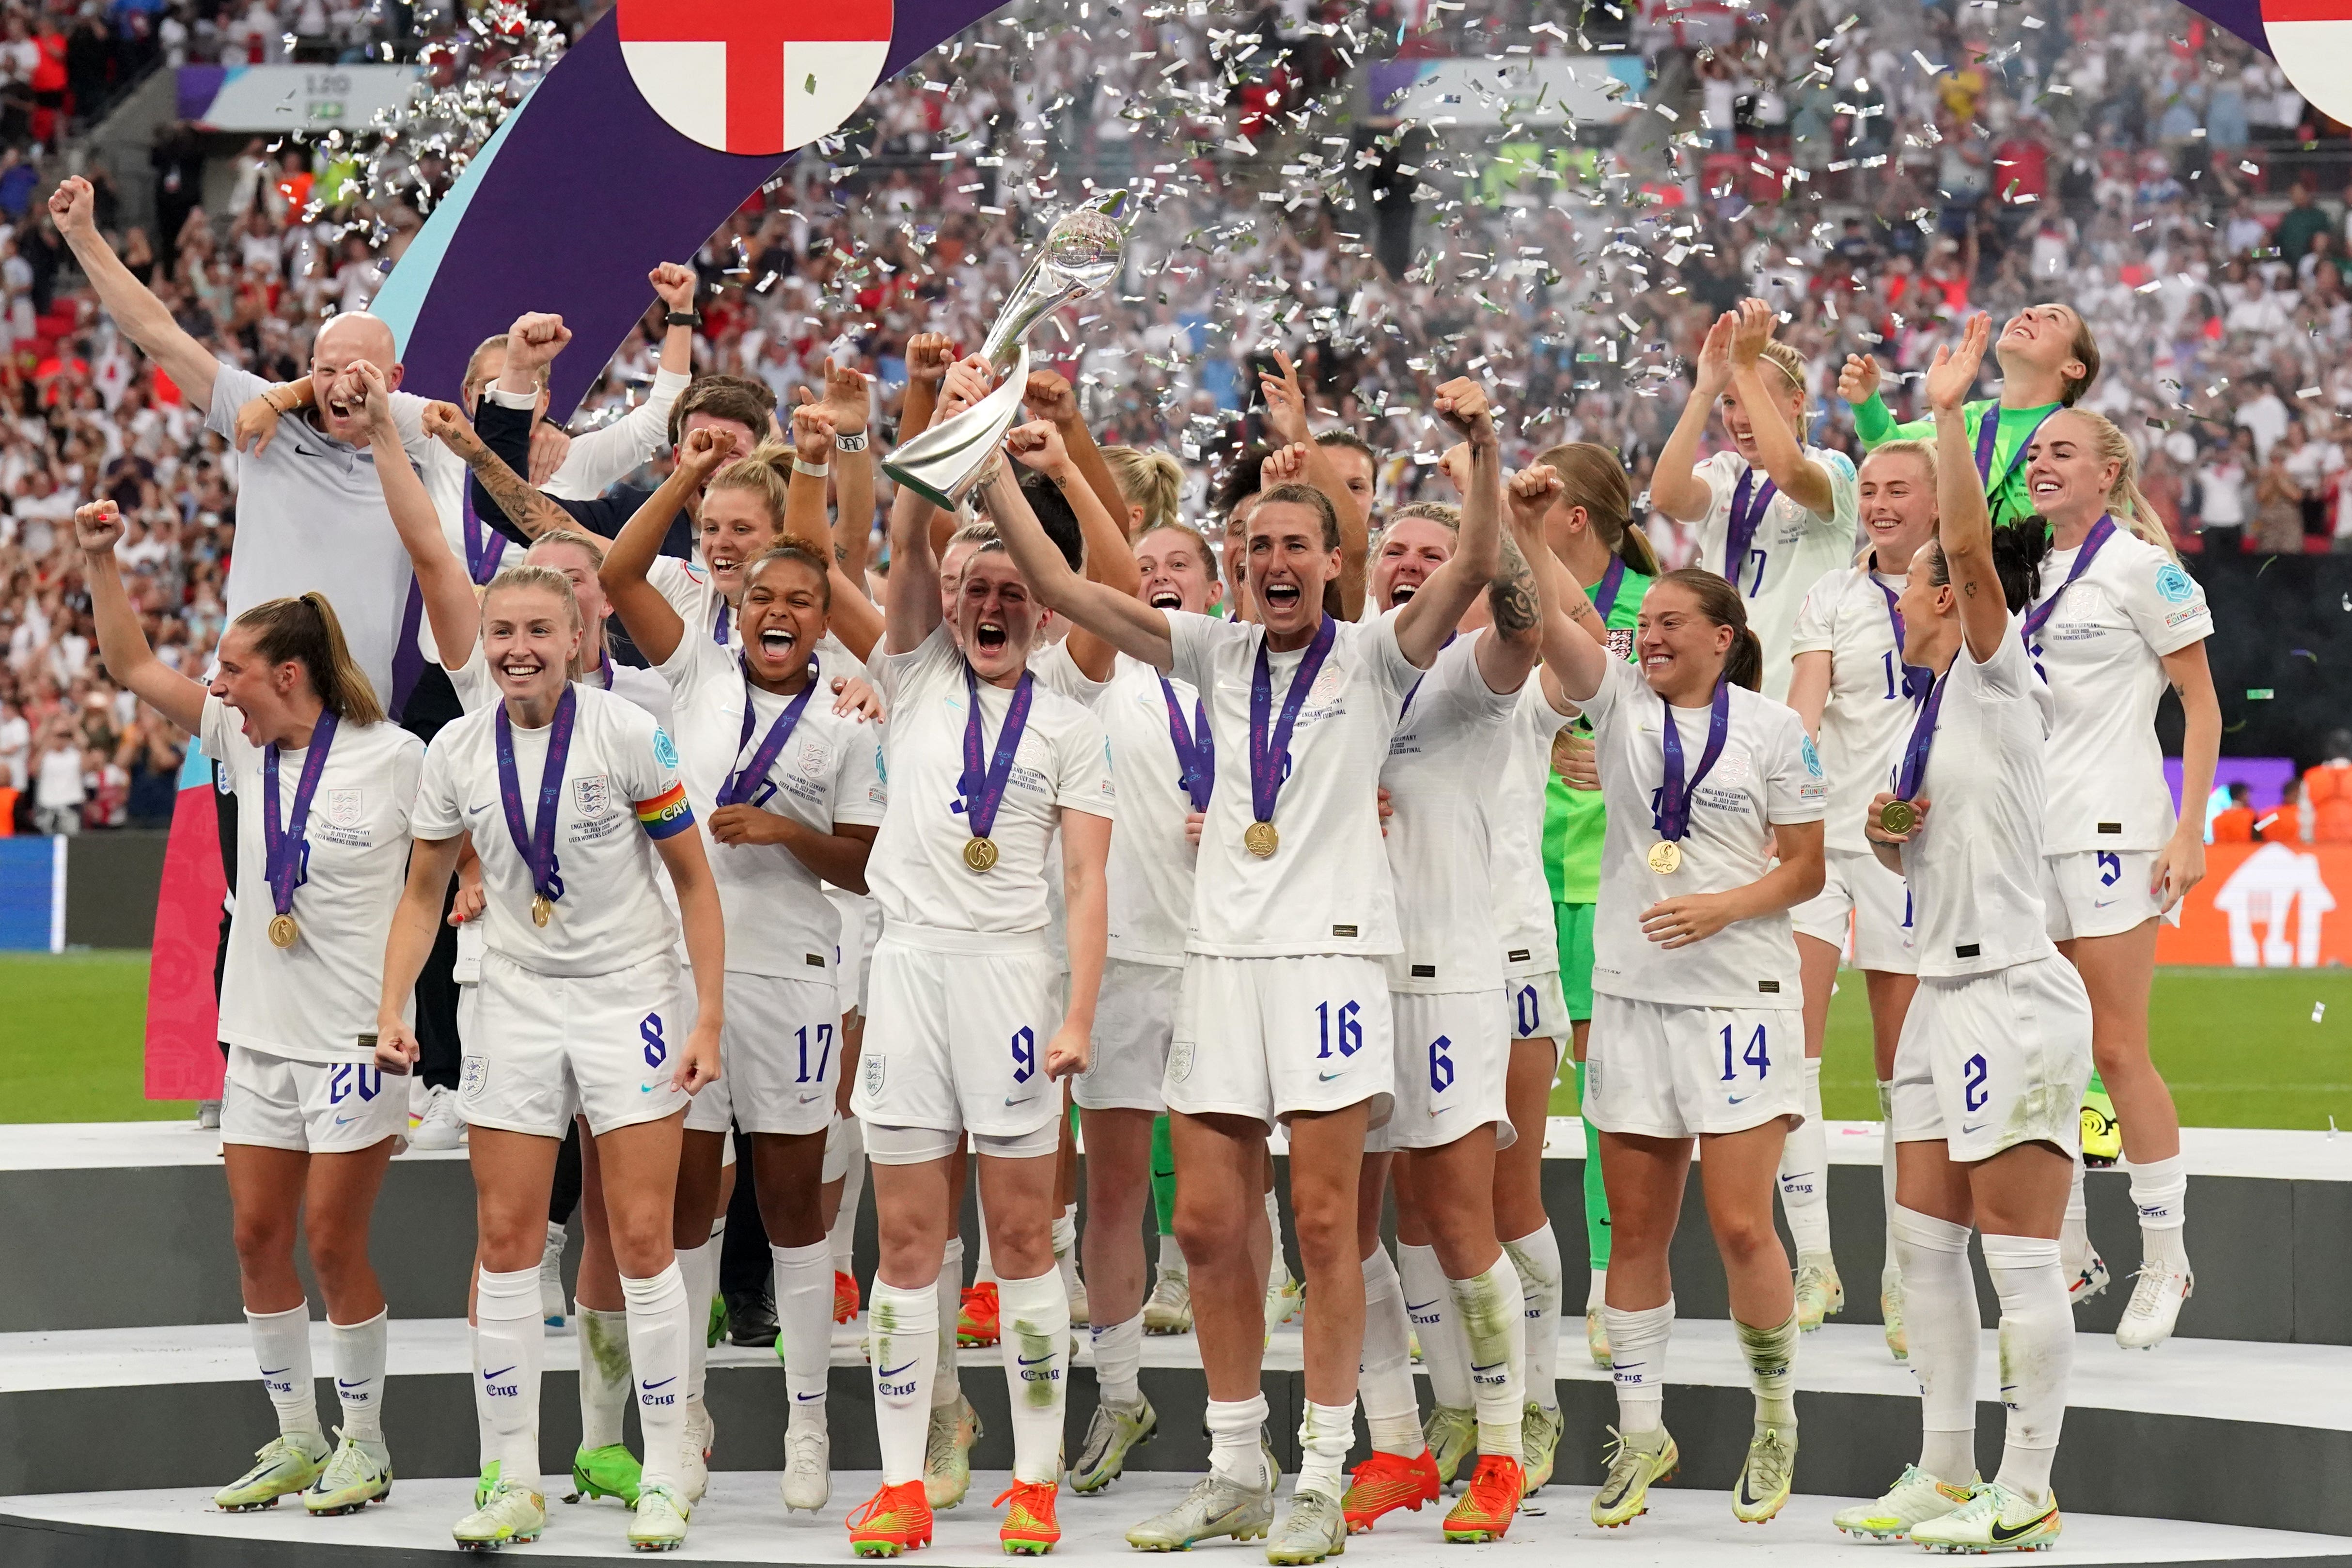 The Lionesses’ Euro 2022 victory last summer sparked huge interest in women’s football in England